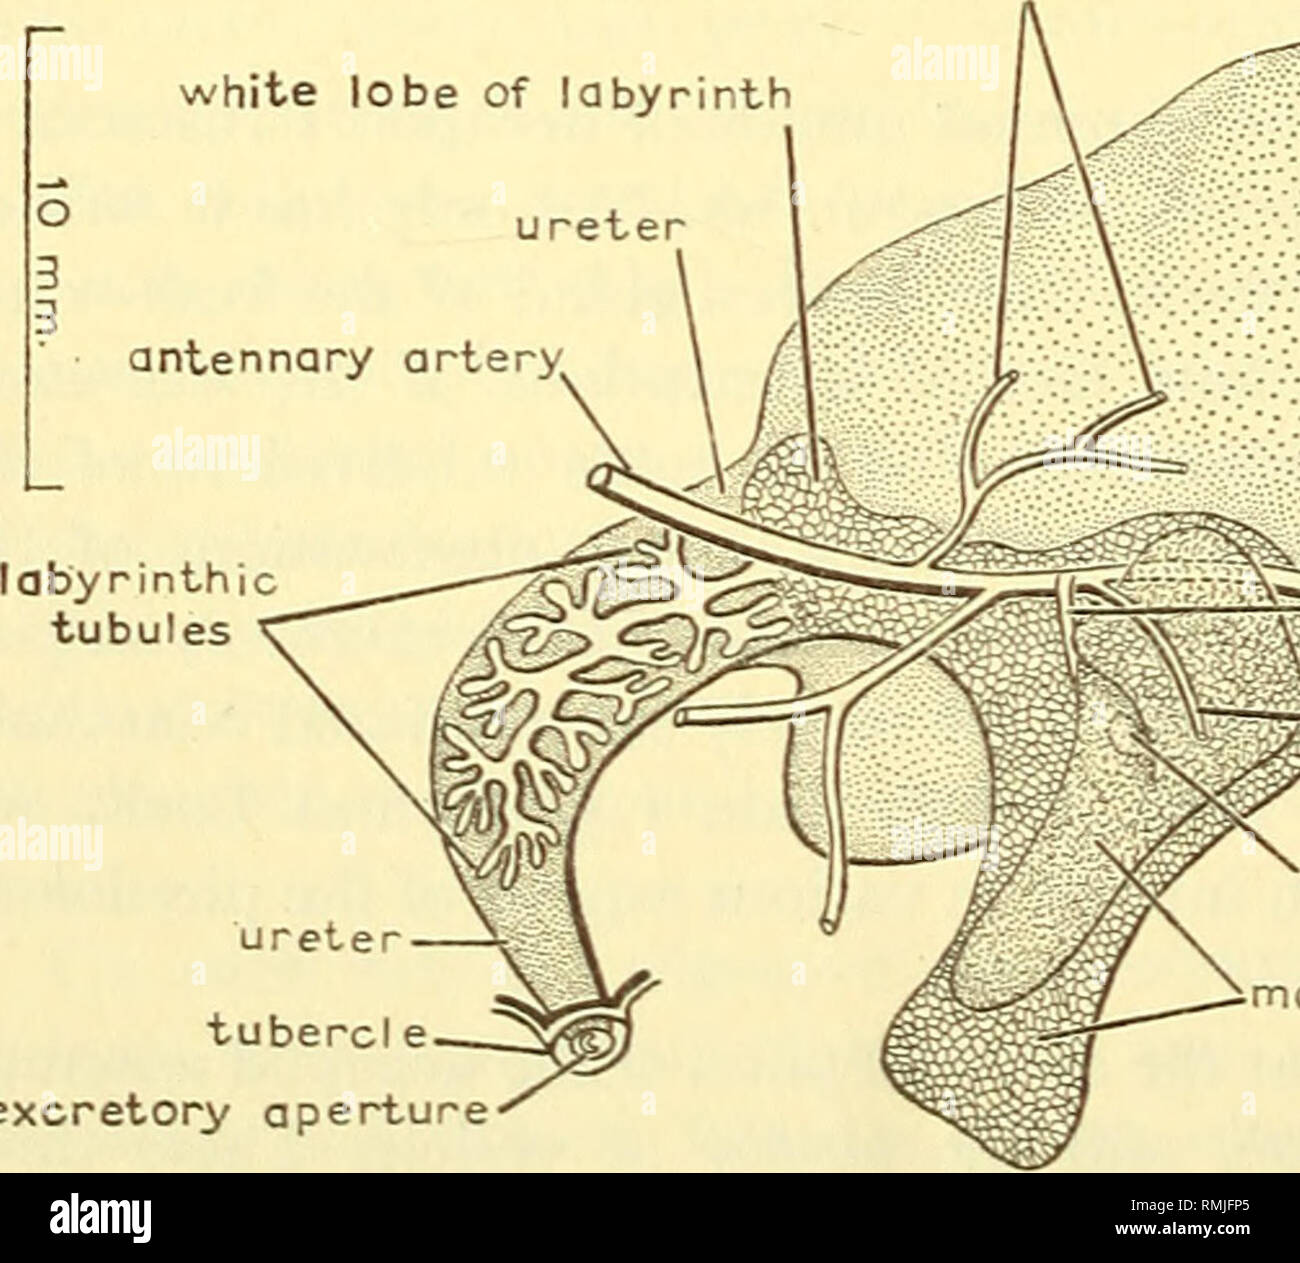 . Annals of the South African Museum = Annale van die Suid-Afrikaanse Museum. Natural history. d igestive gland (dorsal lobe) digestive gland (anterior lobe) carapace an*er or mandibular apodeme otor muscle of antenna ma n lobe of lobyrmth tubercle Fig. 38. Diagram of left antennal gland /;; situ. excretory products to the exterior is effected by the ureter, which is continuous with the bladder and discharges on an excretory tubercle at the base of the antenna. The arrangement of the parts is variable, especially in the Macrura Reptantia and, although the antennal gland of Astacus is sometimes Stock Photo